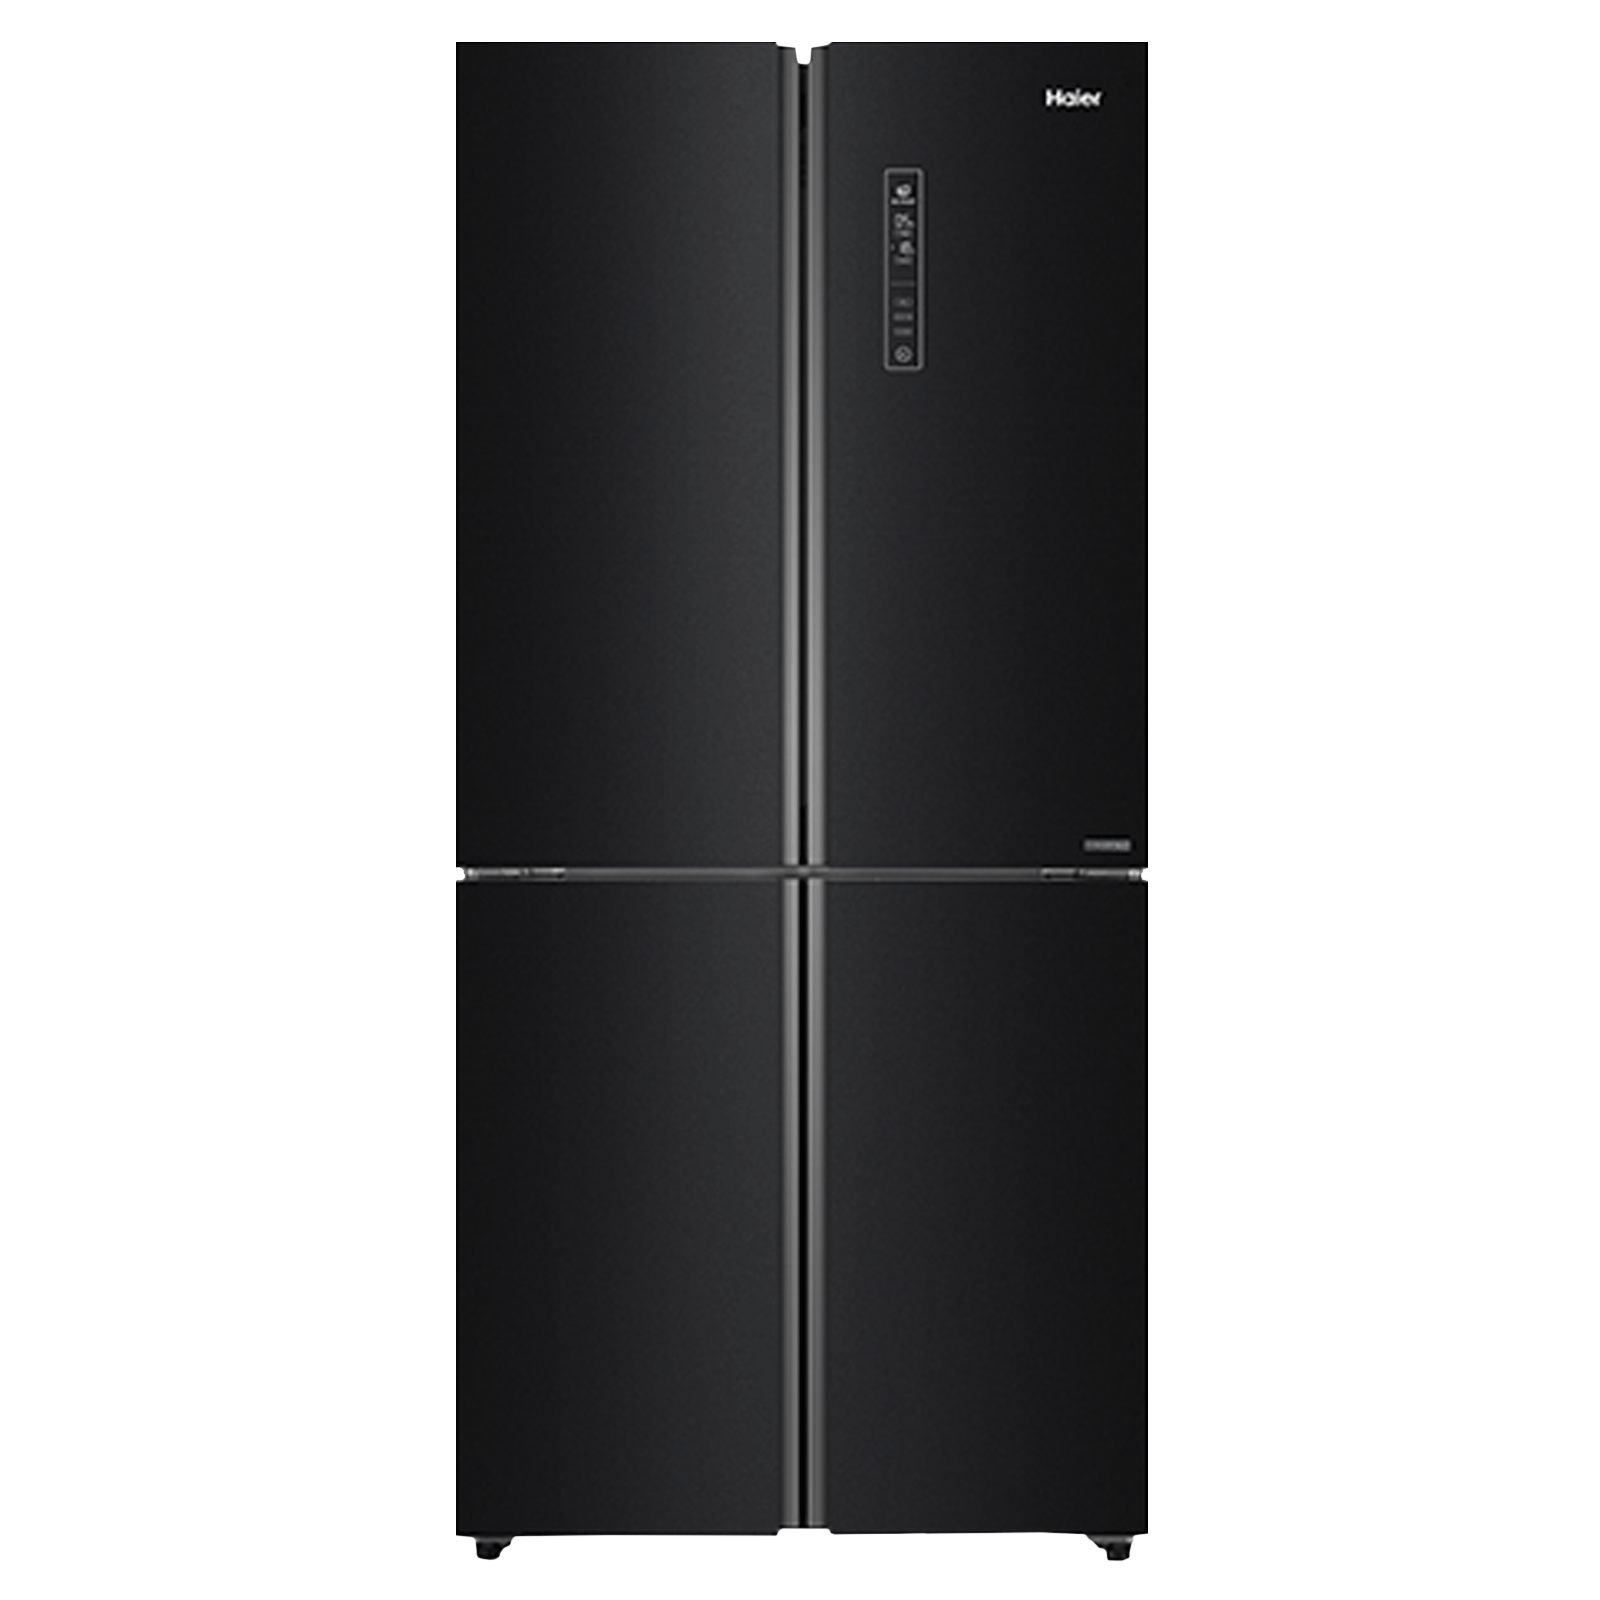 Haier 531 Litres A++ Frost Free French Door Convertible Refrigerator with Dual Humidity Zone (HRB-550KS, Black Steel)